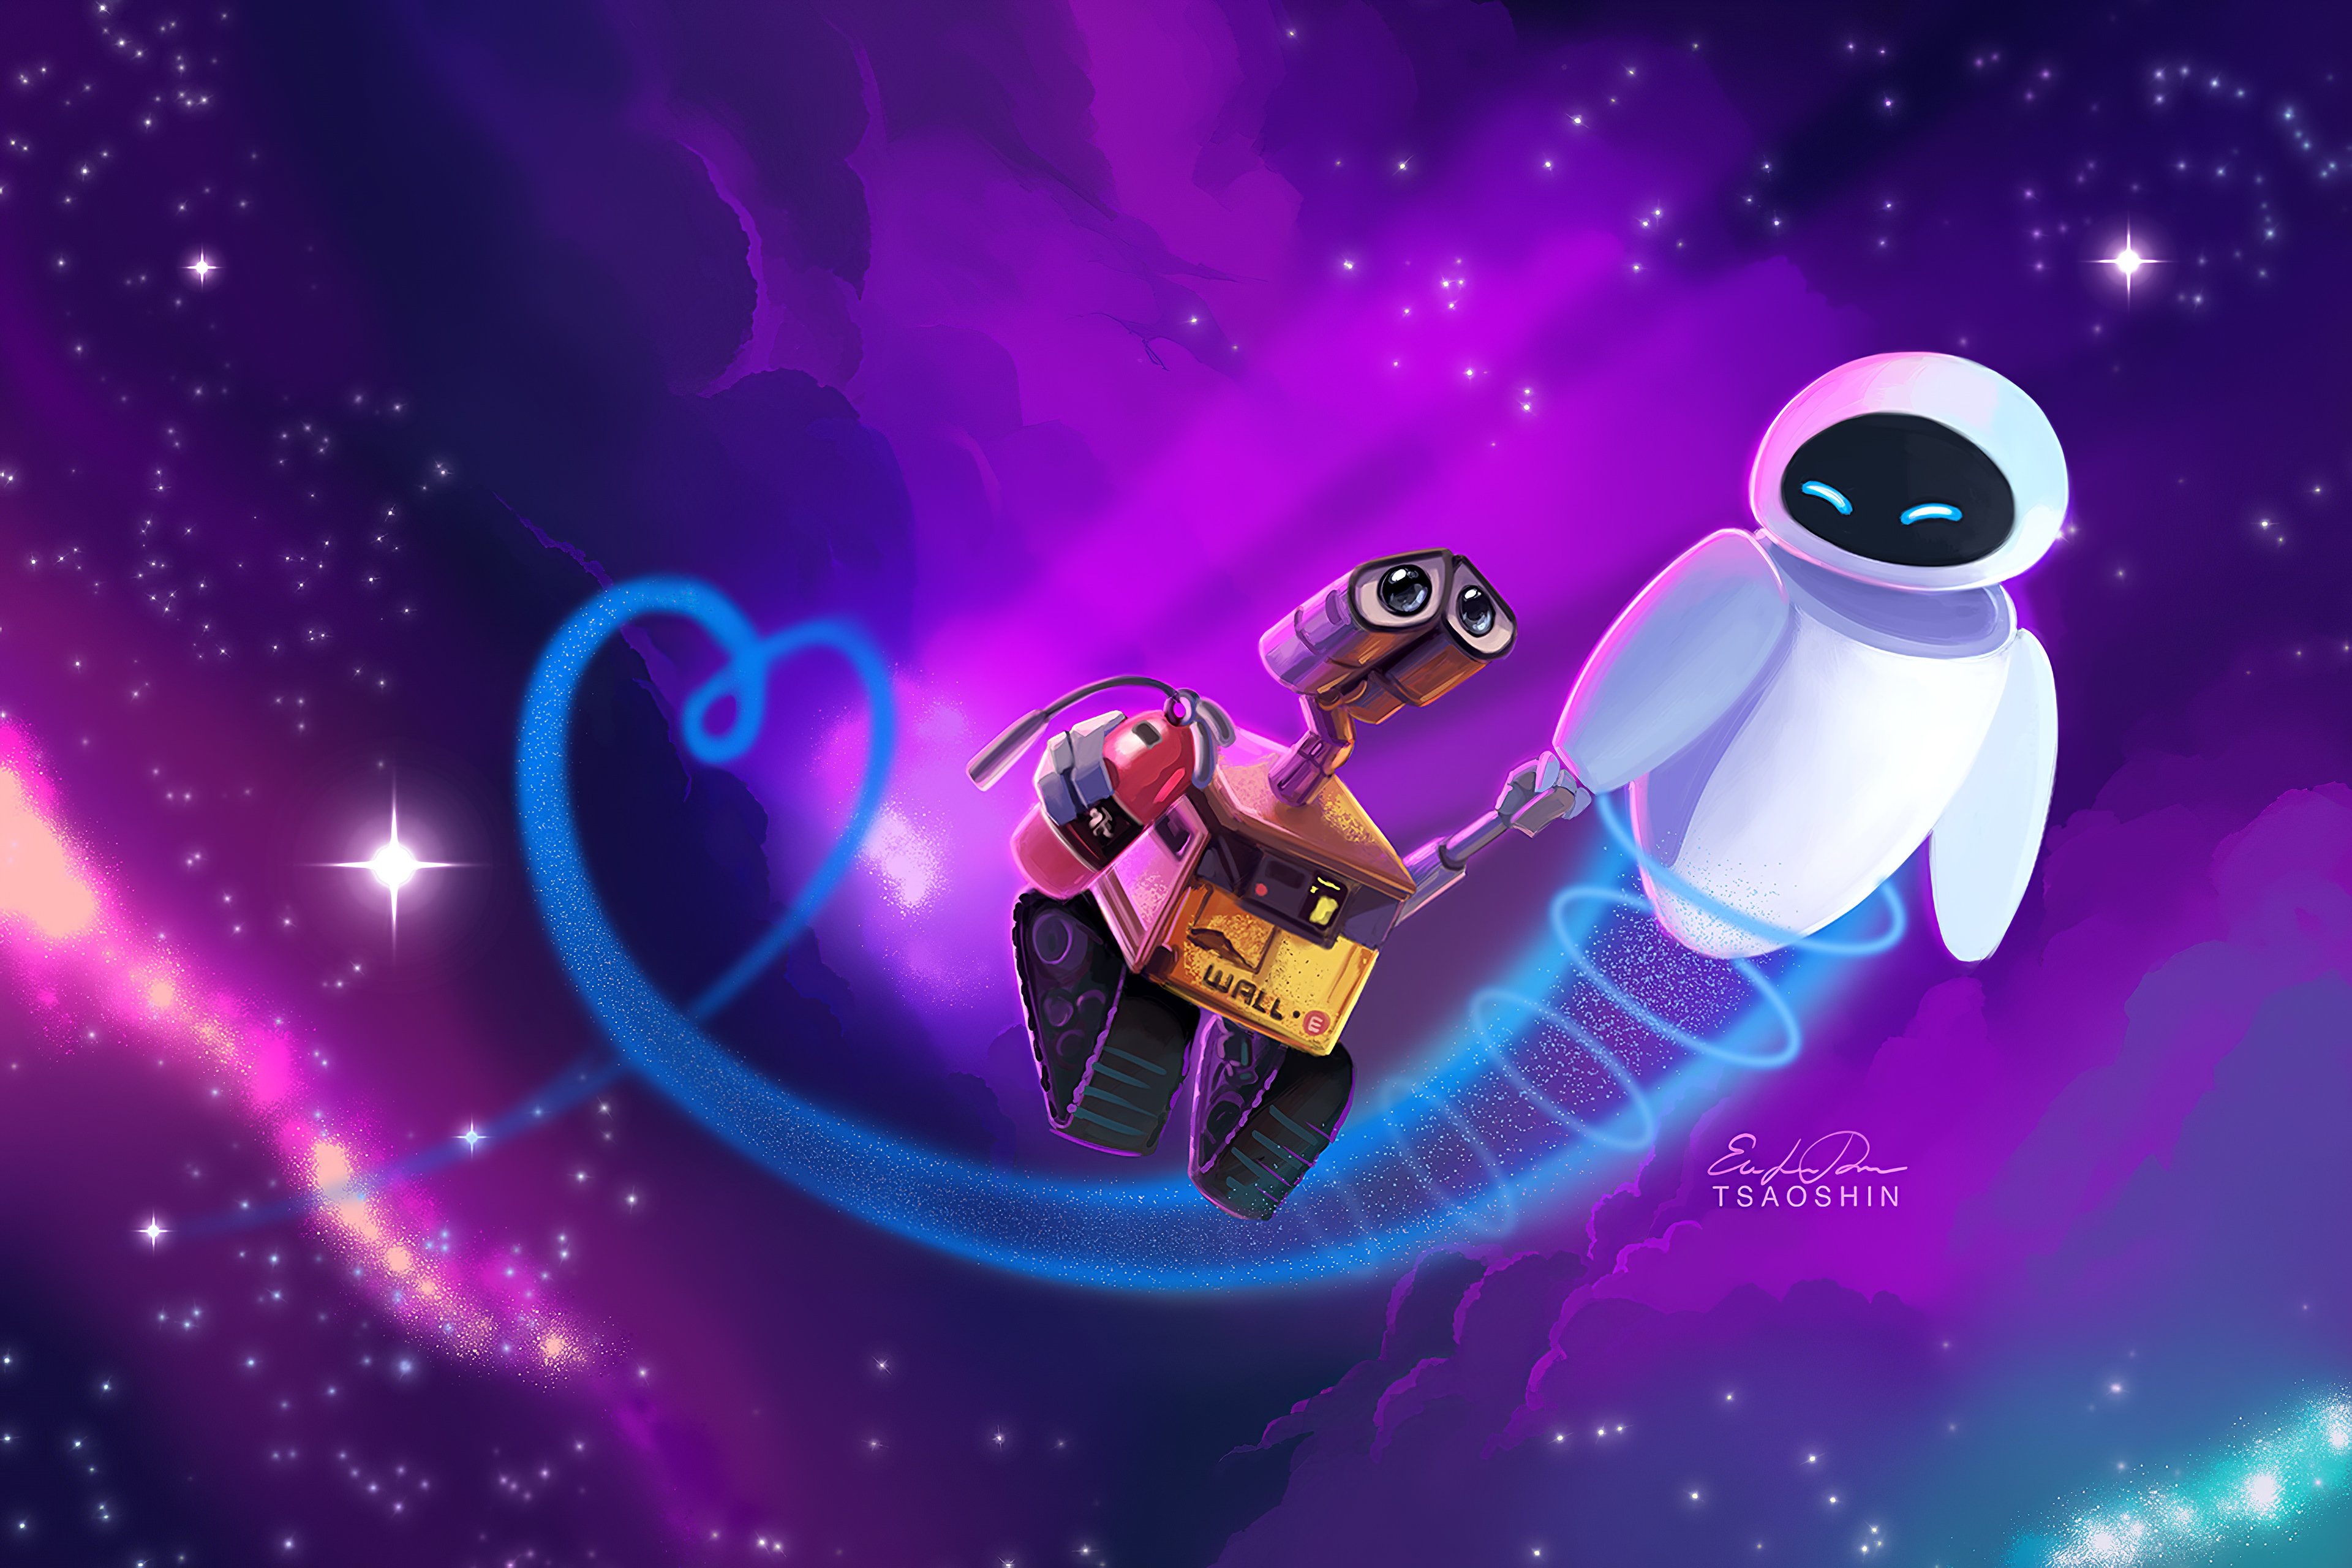 Wallpaper Eve and Wall E